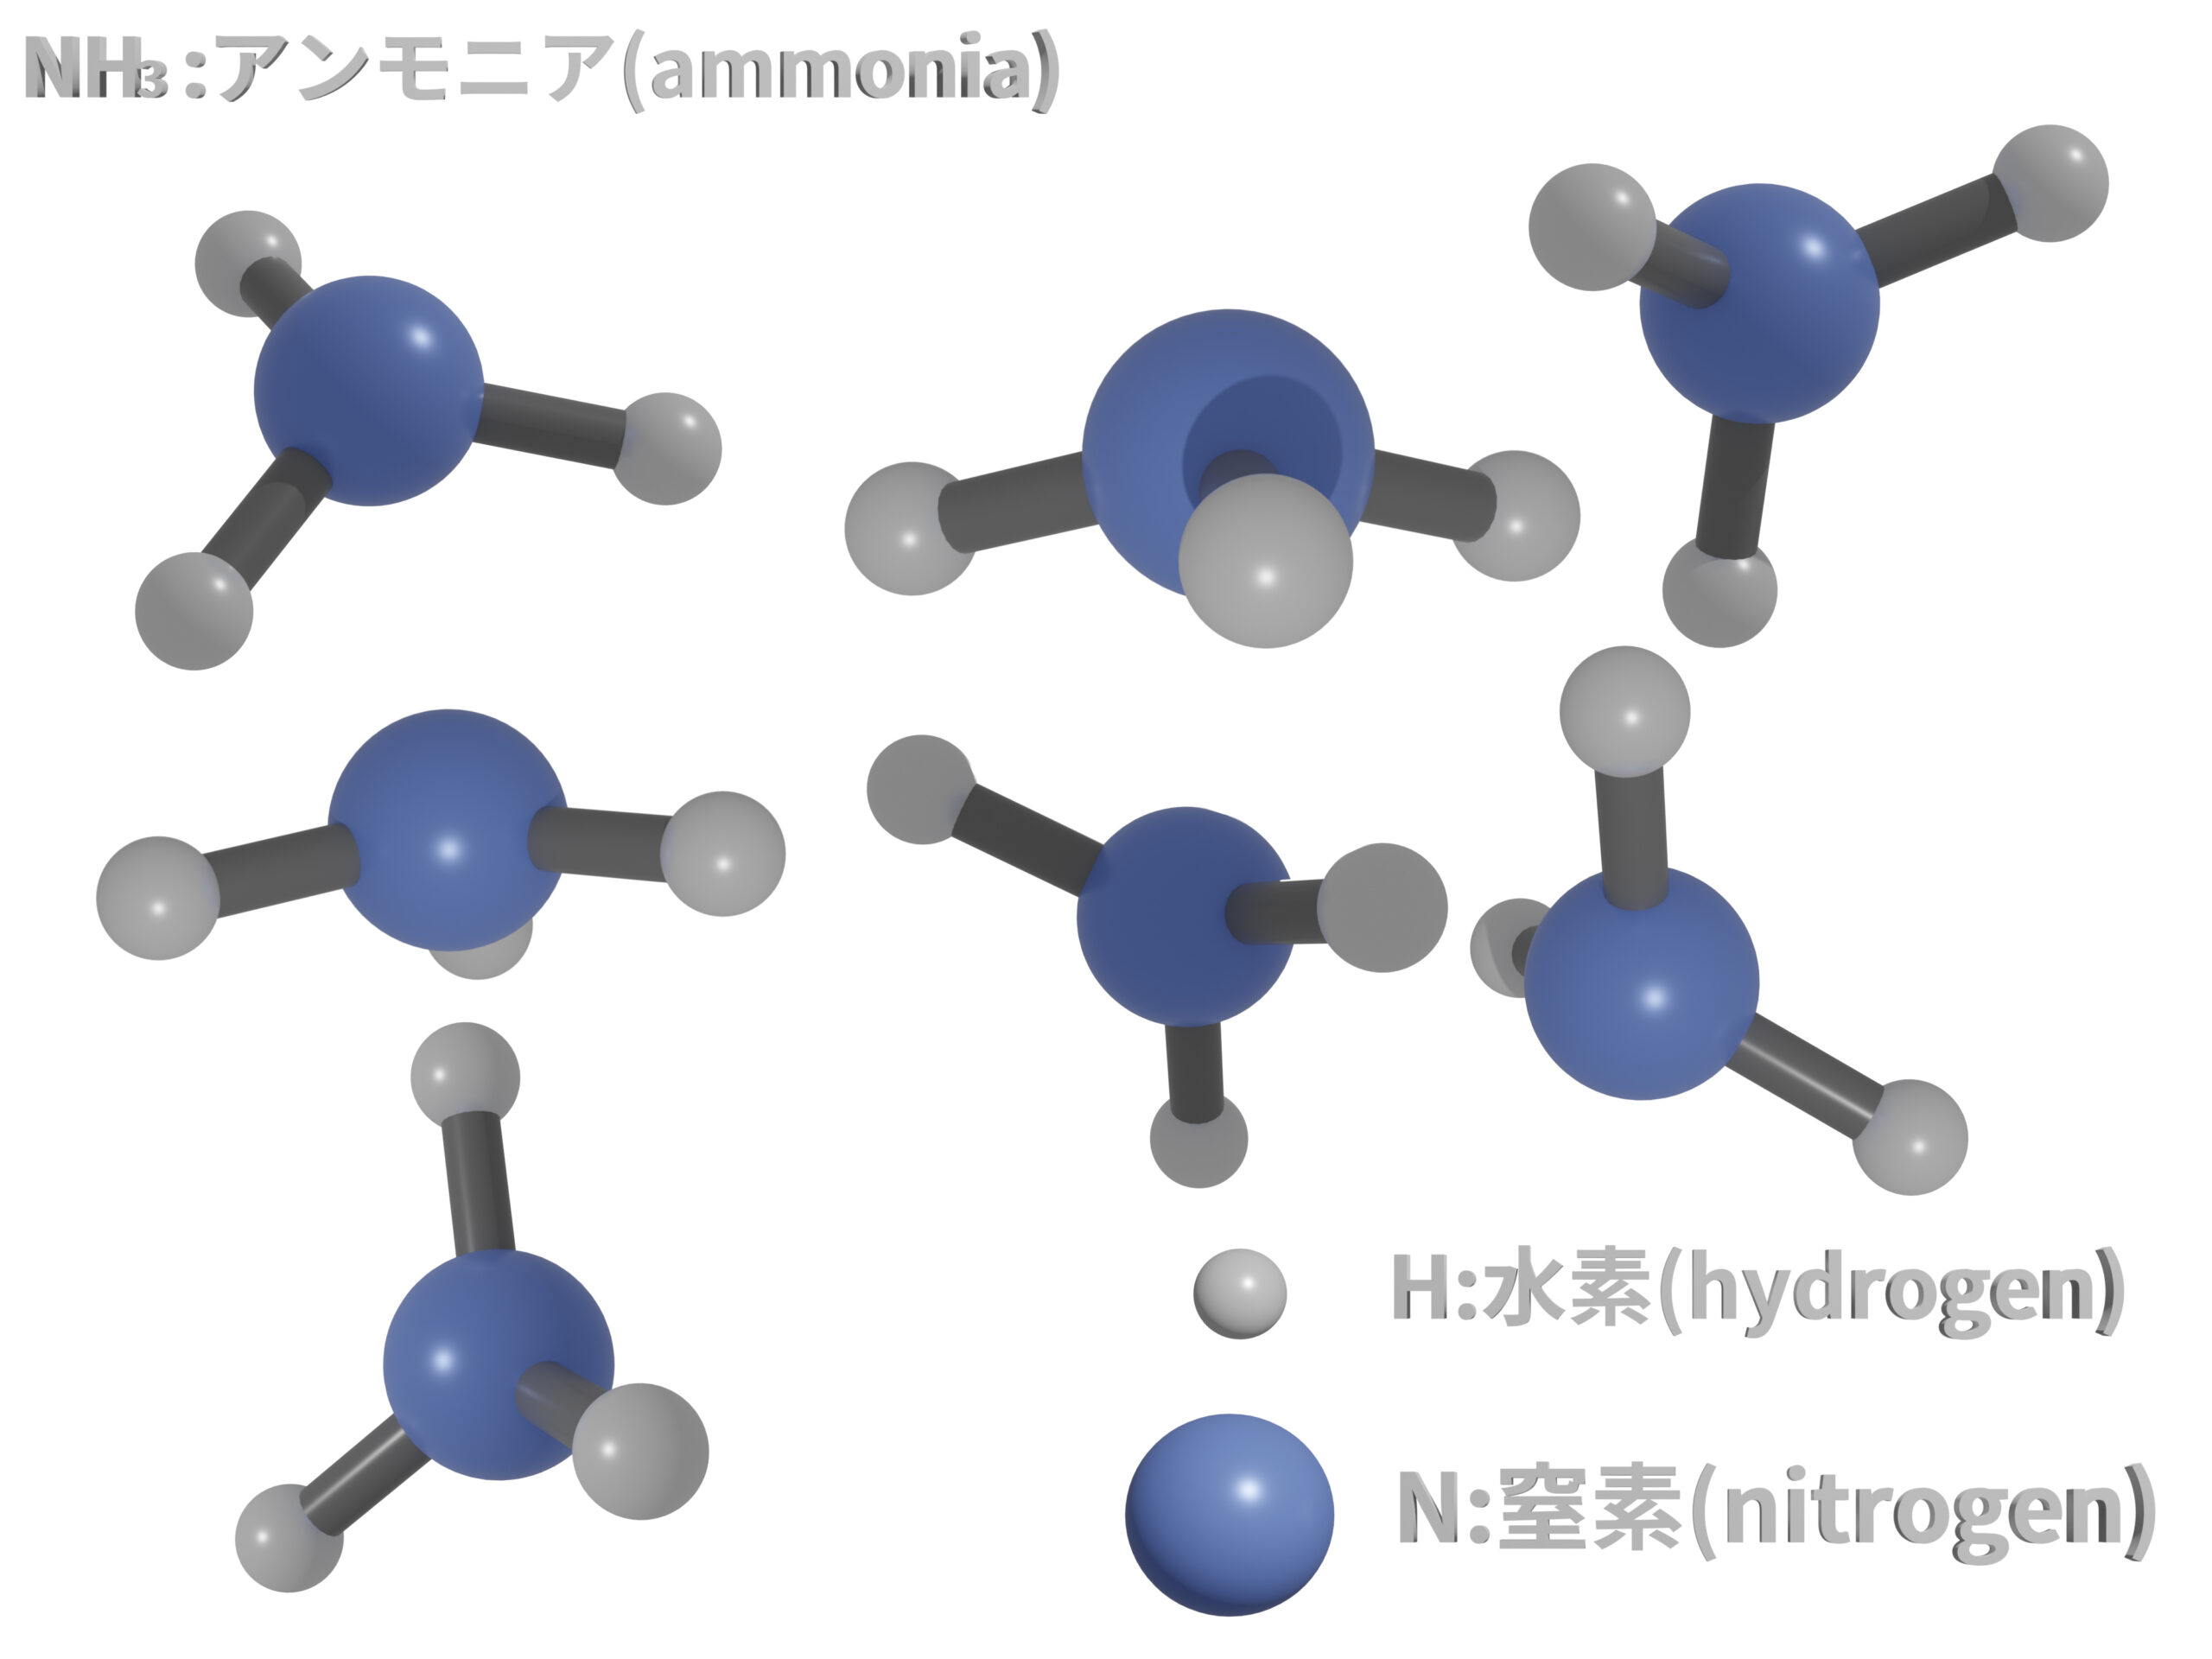 【News】Can ammonia really help Japan decarbonize?